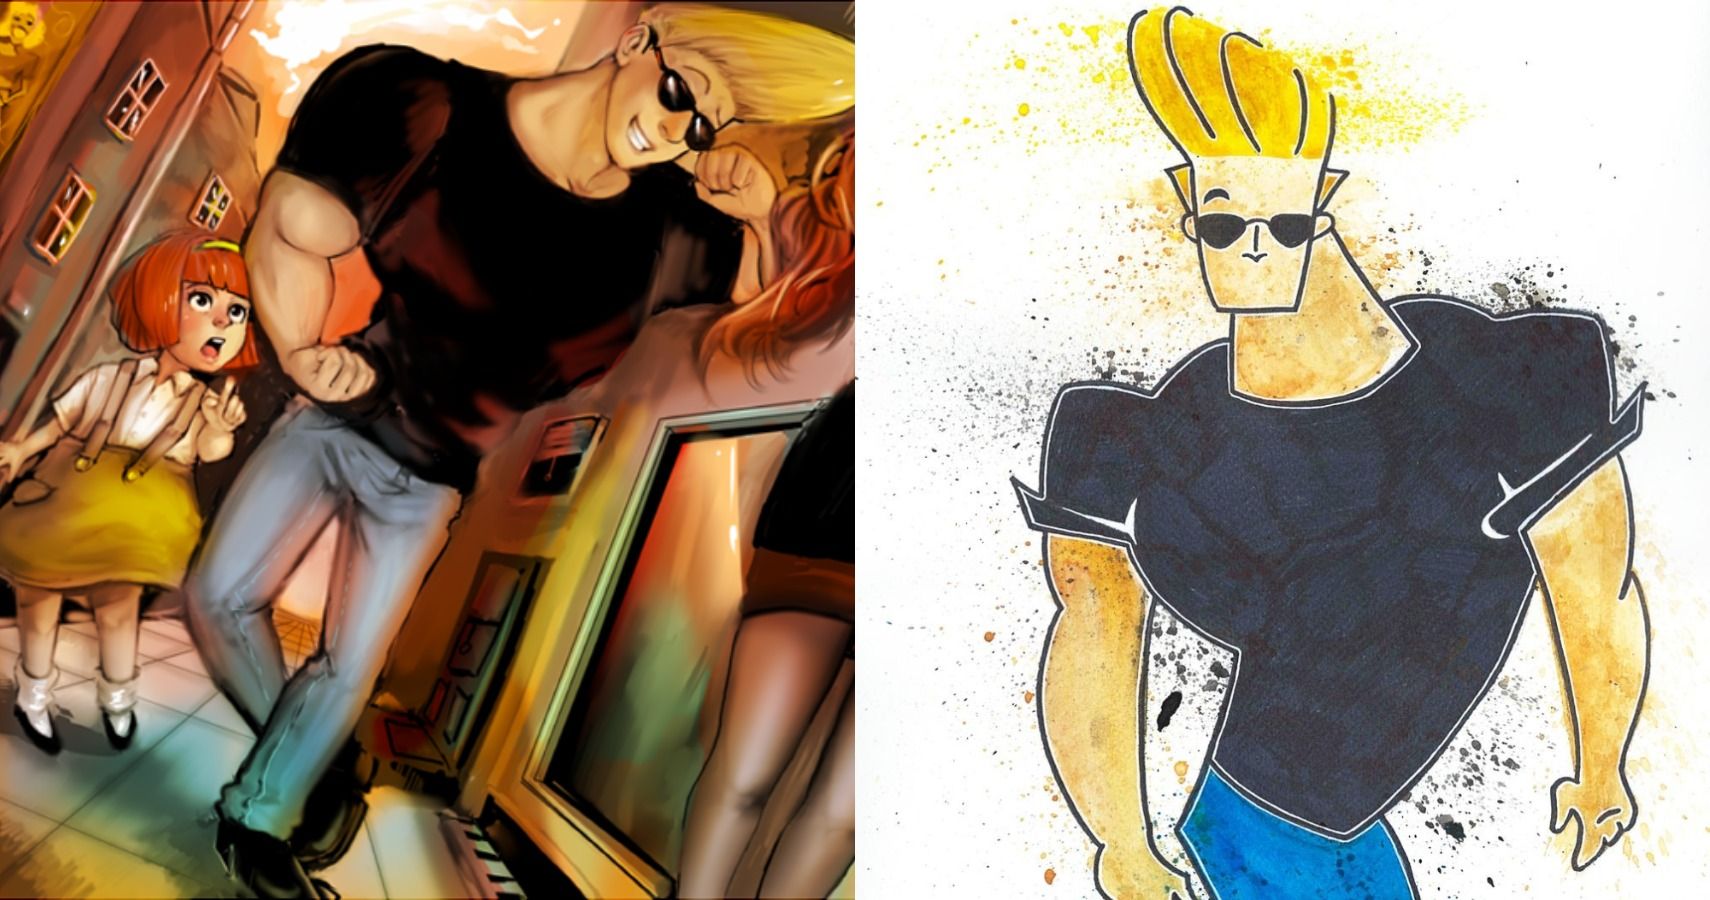 10 Pieces Of Johnny Bravo Fan Art That Make Us Want To Watch Reruns